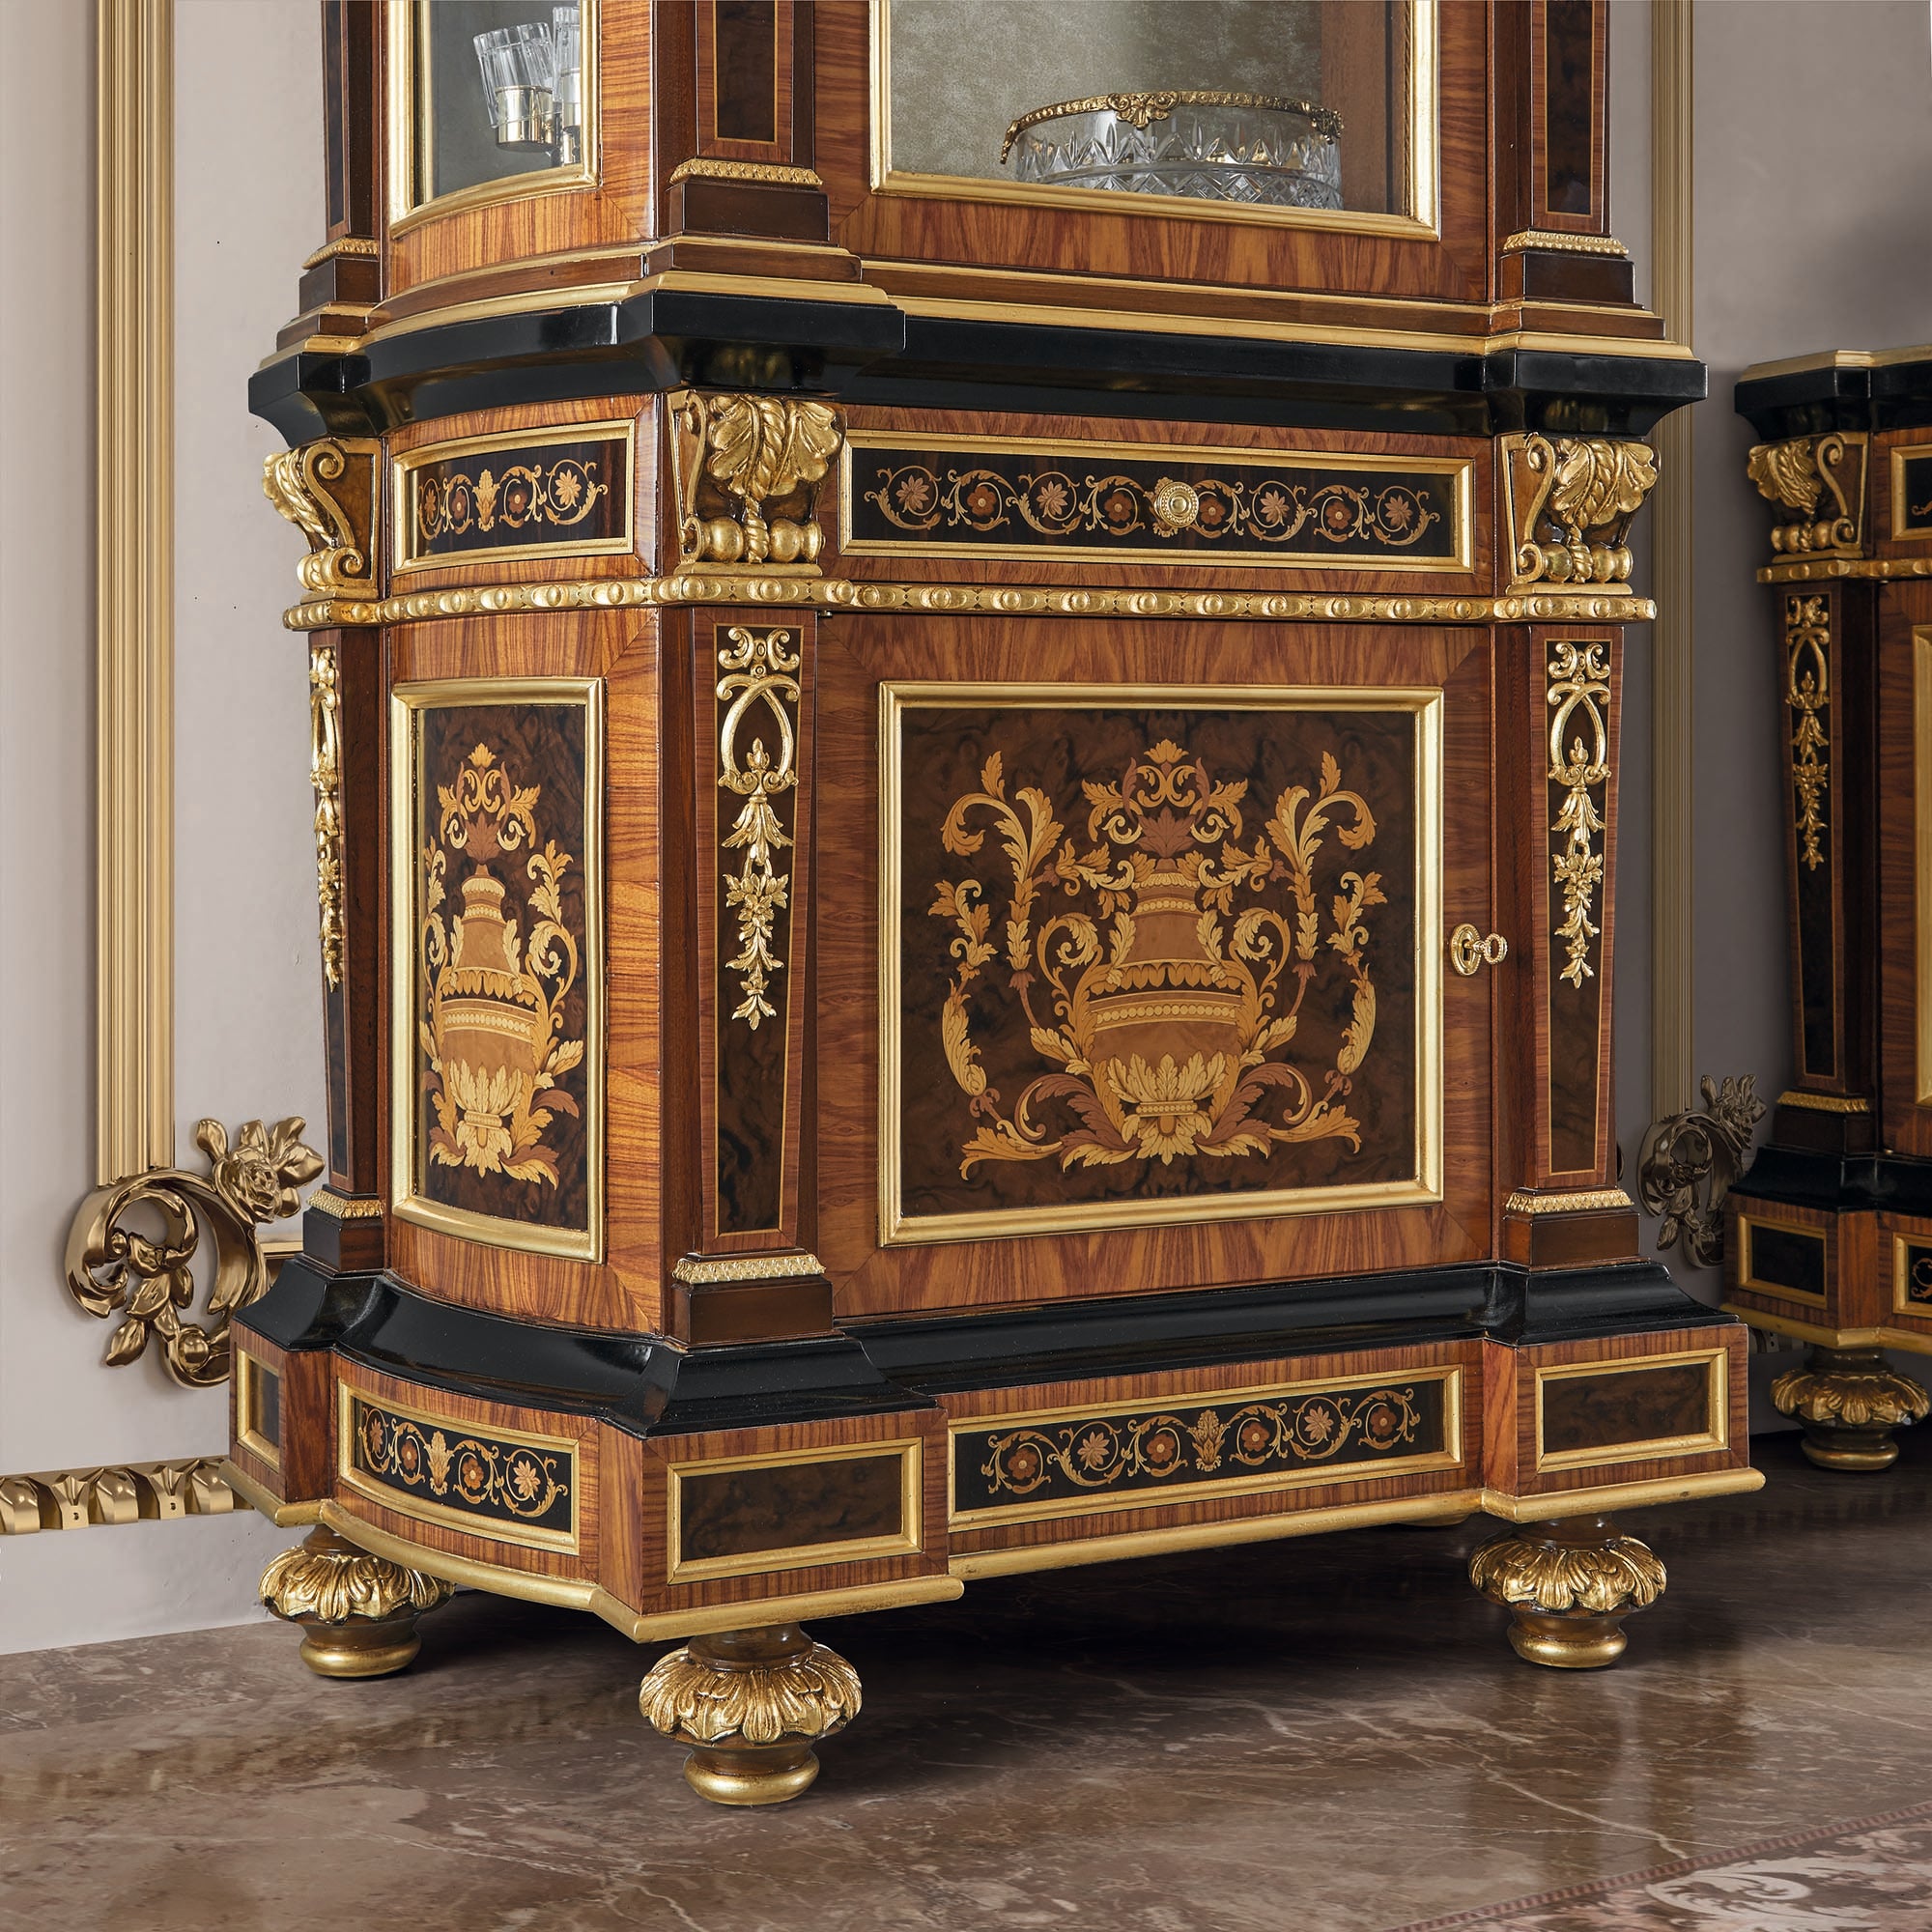 The Art of Italian Furniture: Combining Luxury and Solid Wood